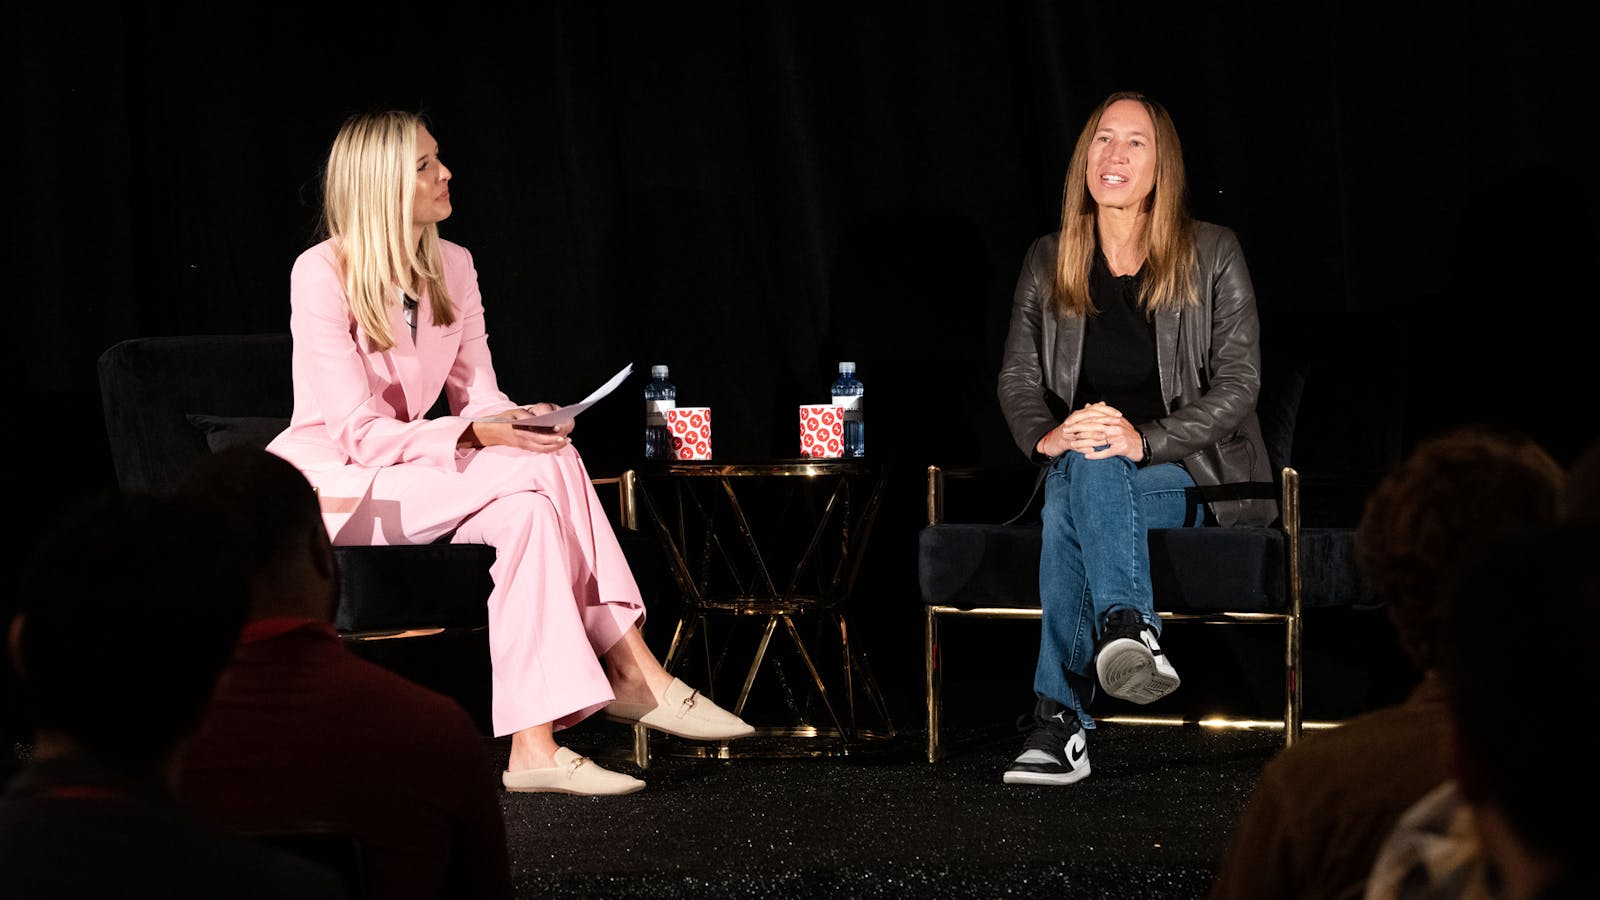 Sandie Hawkins, former TikTok U.S. E-Commerce General Manager (right), with The Information's Kaya Yurieff at our Creator Economy Summit in April. Photo by Erin Beach.